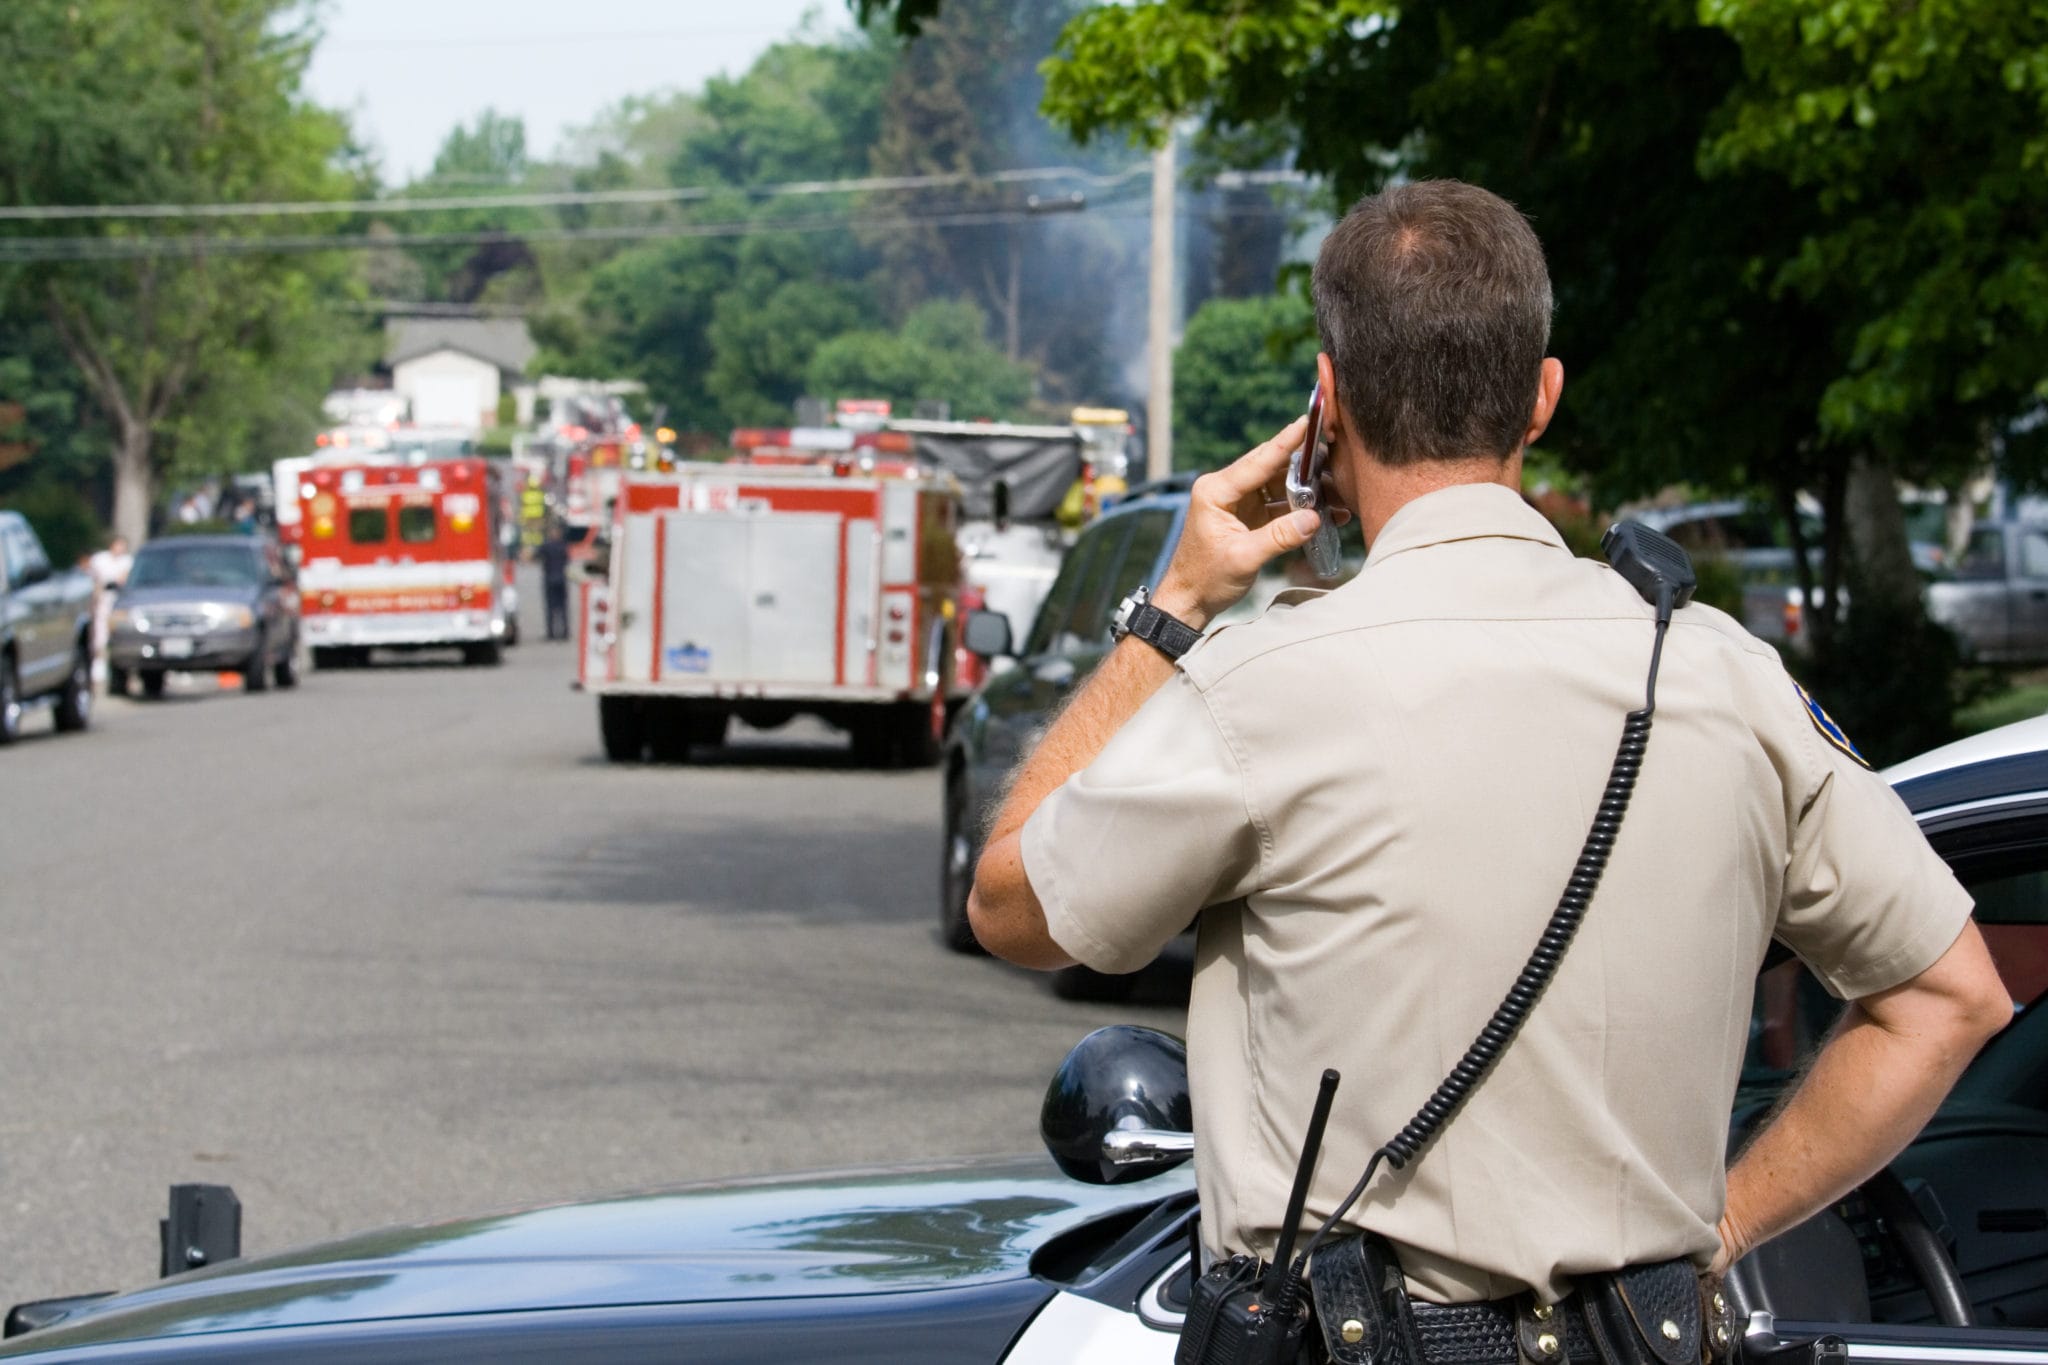 First Responders responding to a fire | Individual and Group Crisis Intervention Training